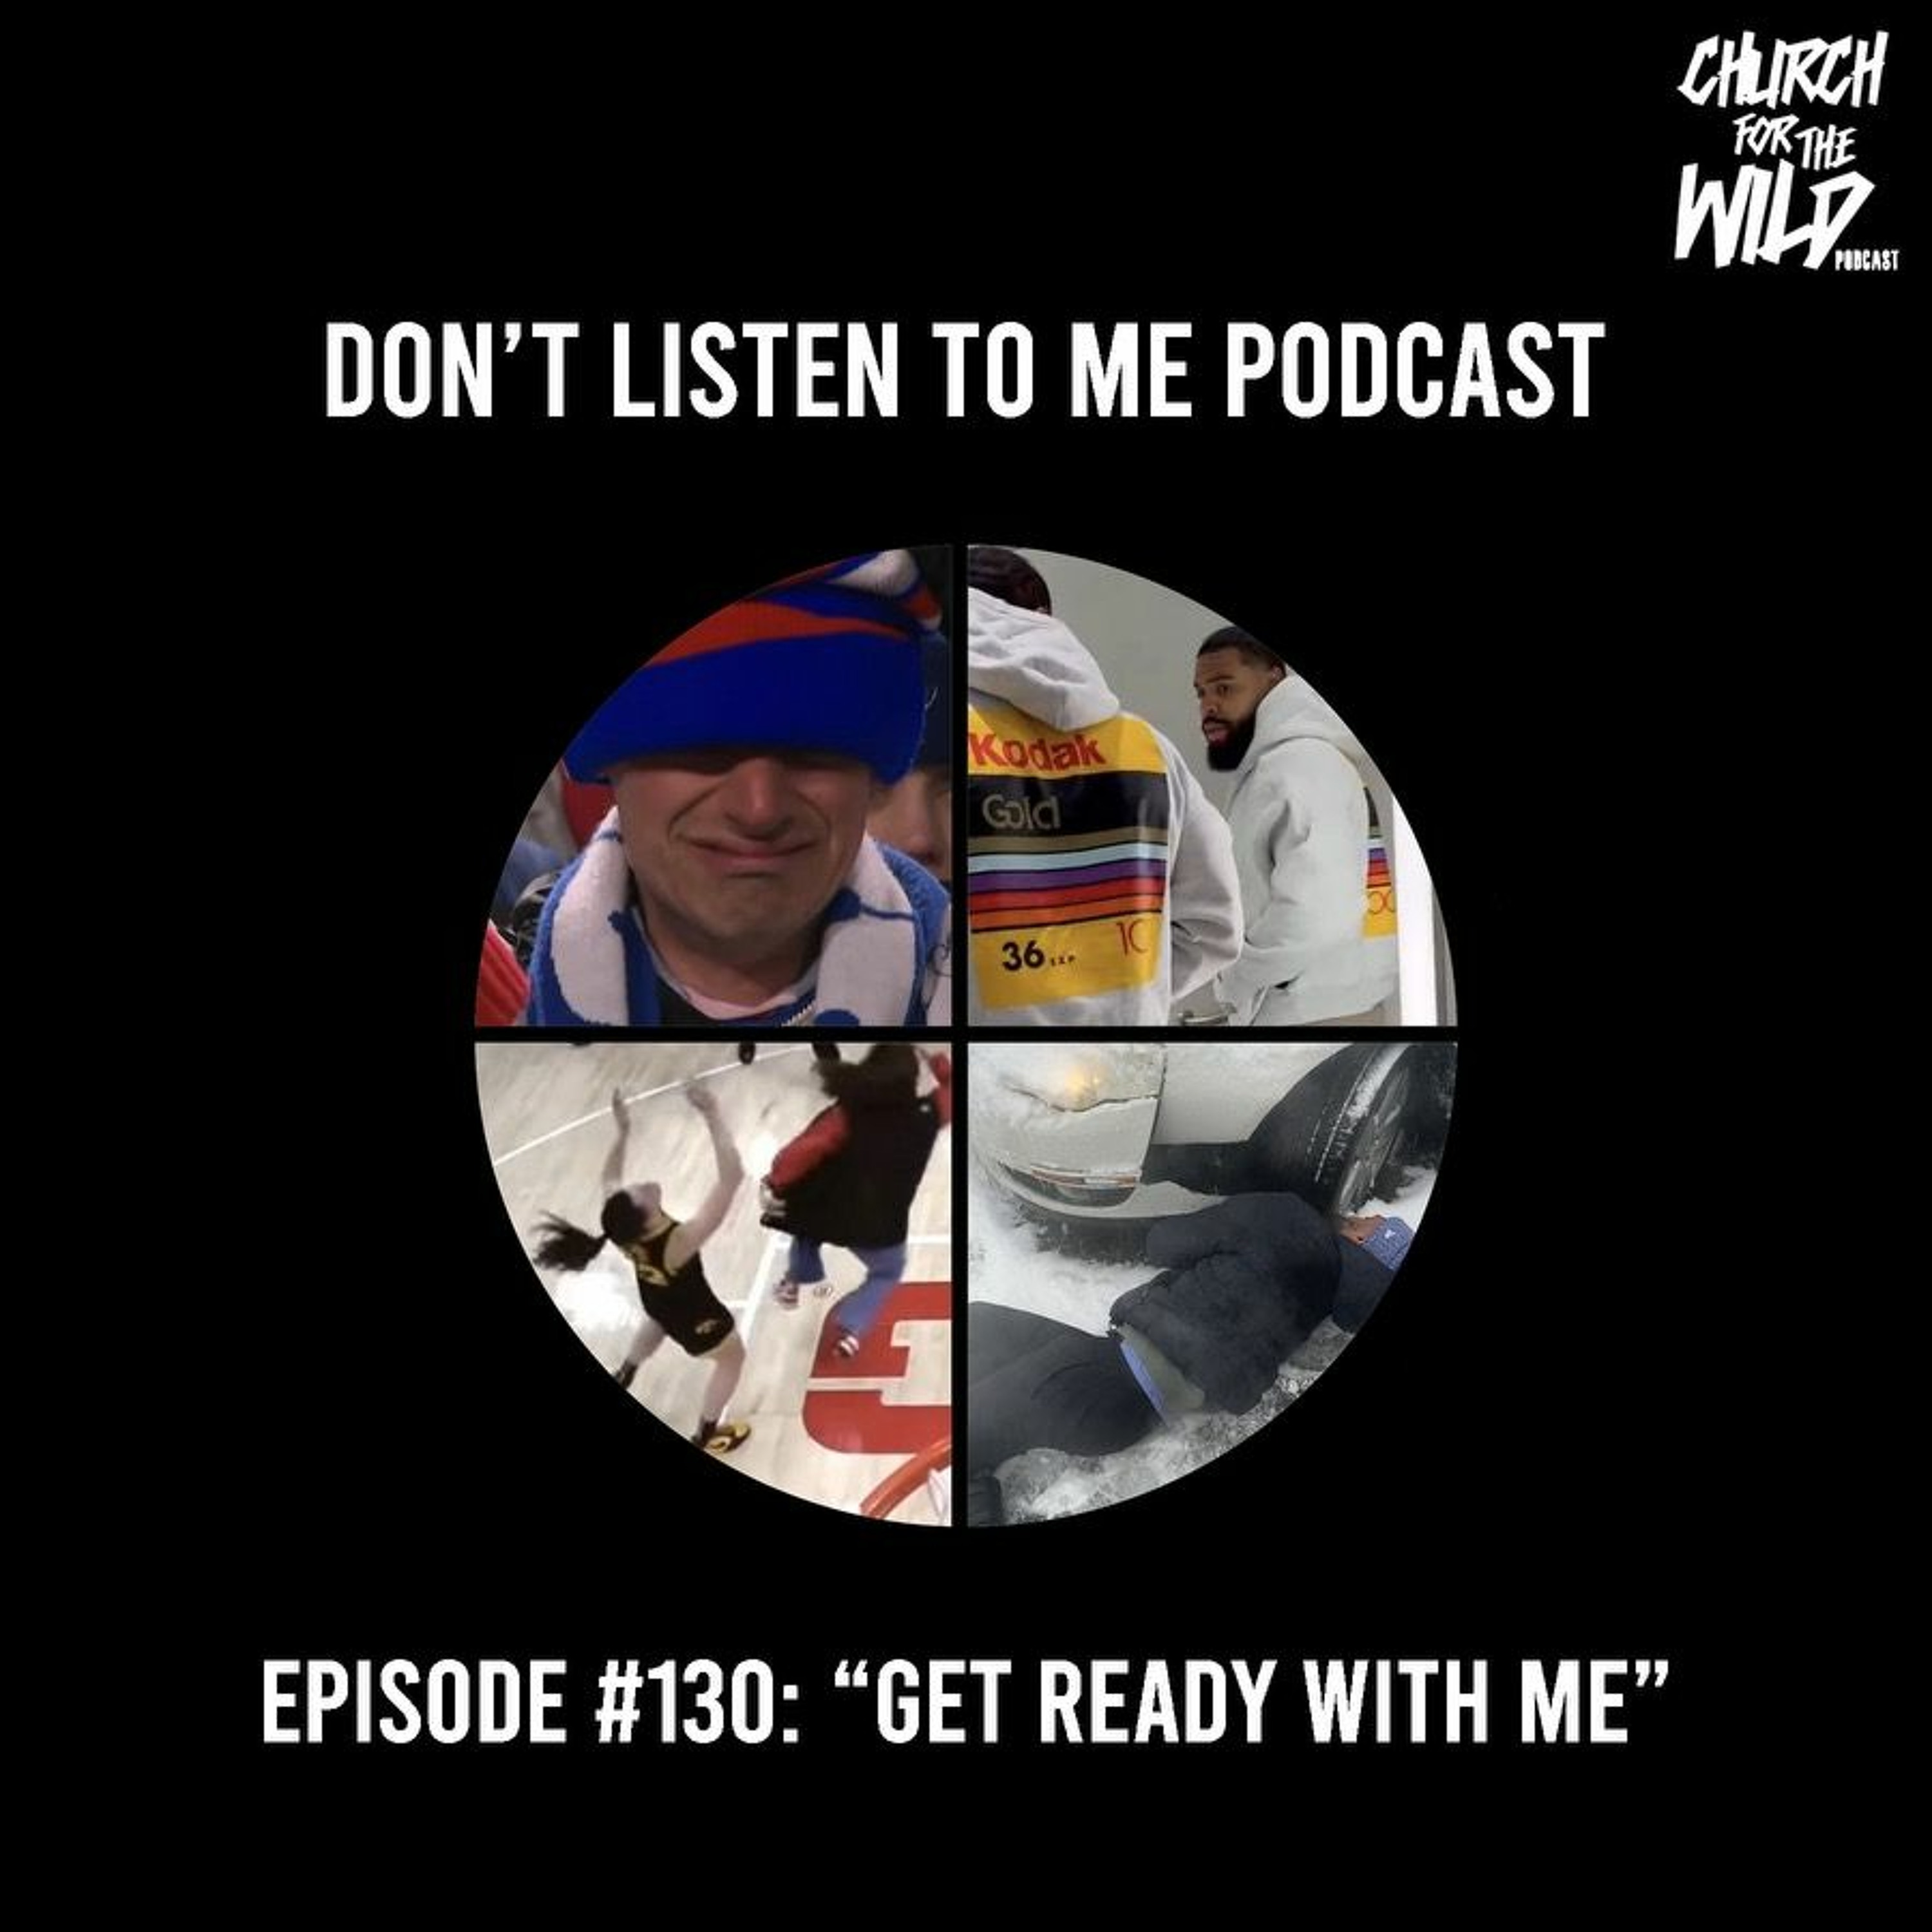 Don’t Listen To Me Episode #130: ”Get Ready With Me”